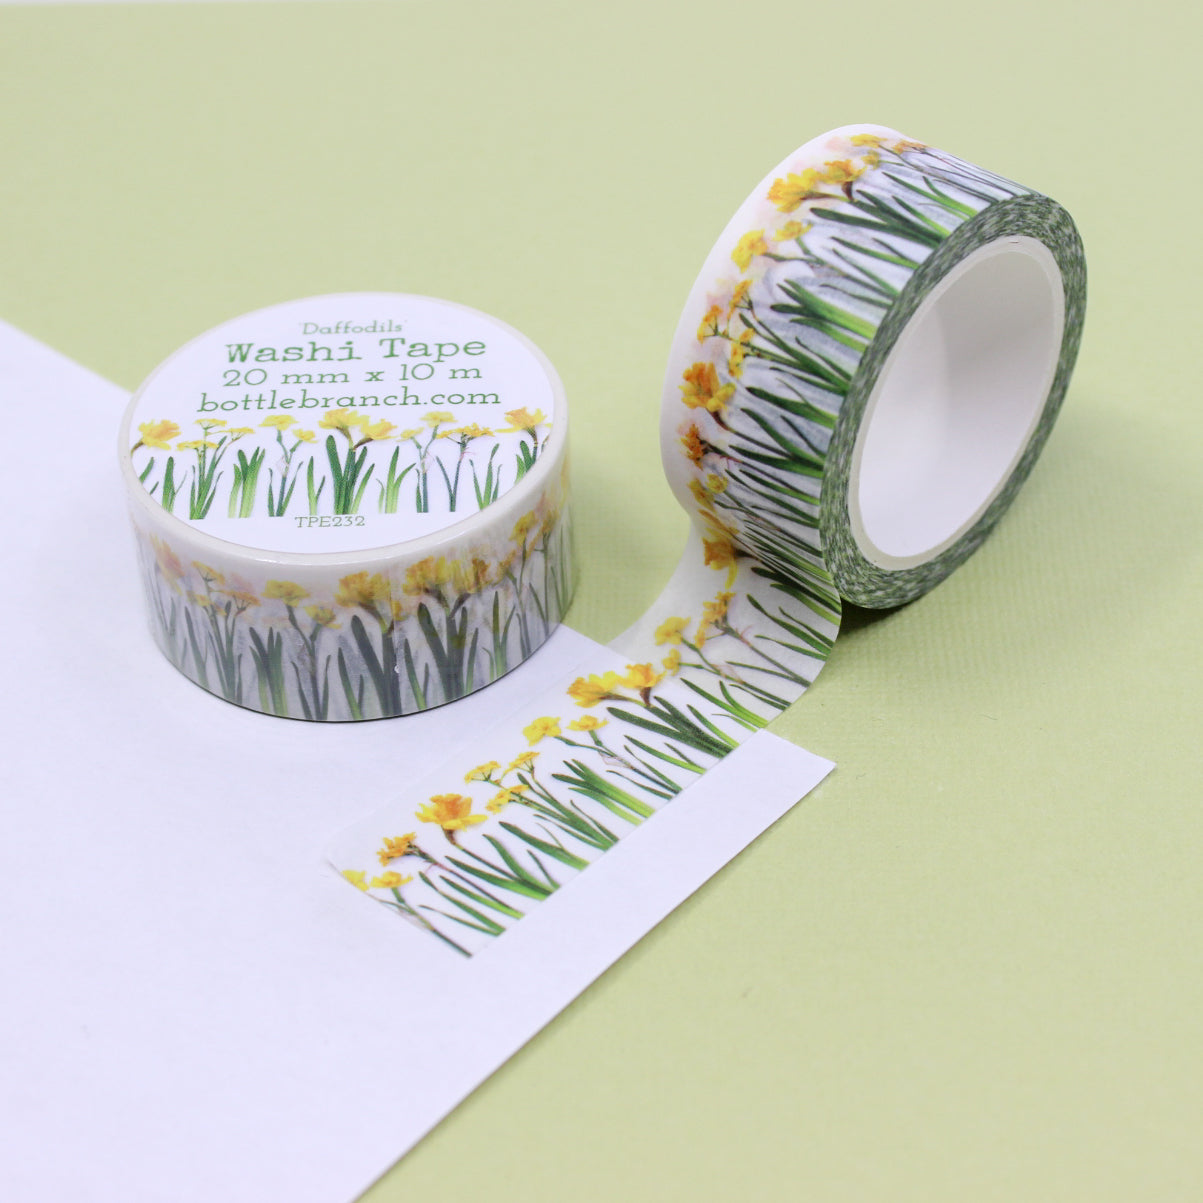 Add a touch of sunshine to your projects with our vibrant yellow daffodil washi tape, featuring cheerful daffodil blooms in shades of yellow. our delightful yellow daffodil washi tape, adorned with beautiful daffodil flower patterns that radiate warmth and joy. This tape is designed by Bottle Branch and sold at BBB Supplies Craft Shop.